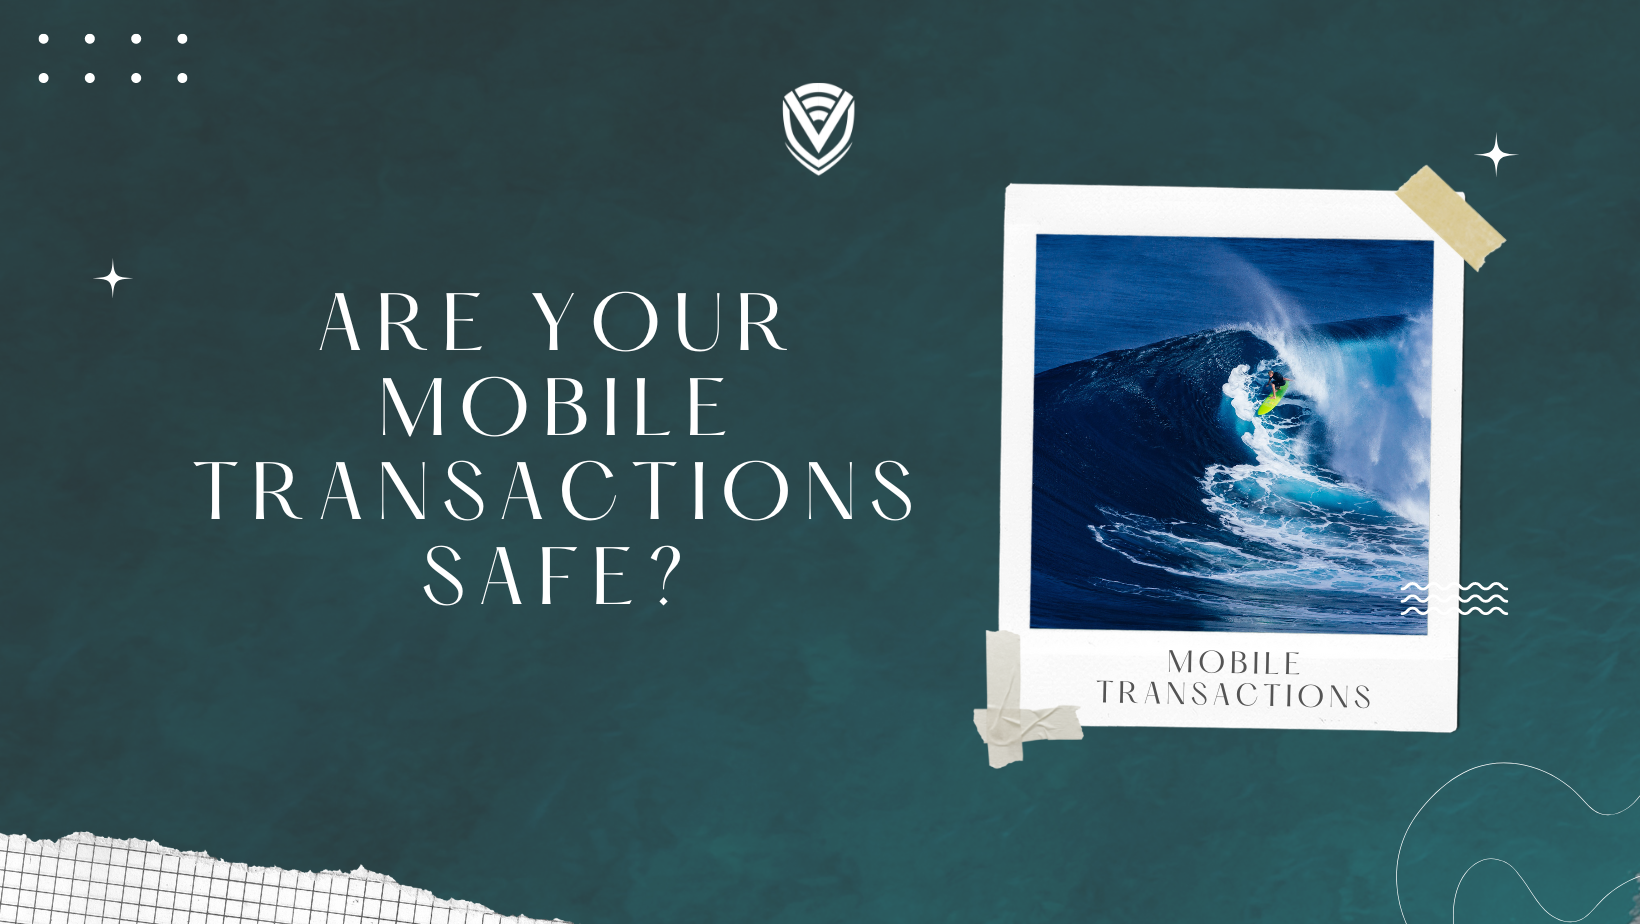 Are Your Mobile Transactions Safe?